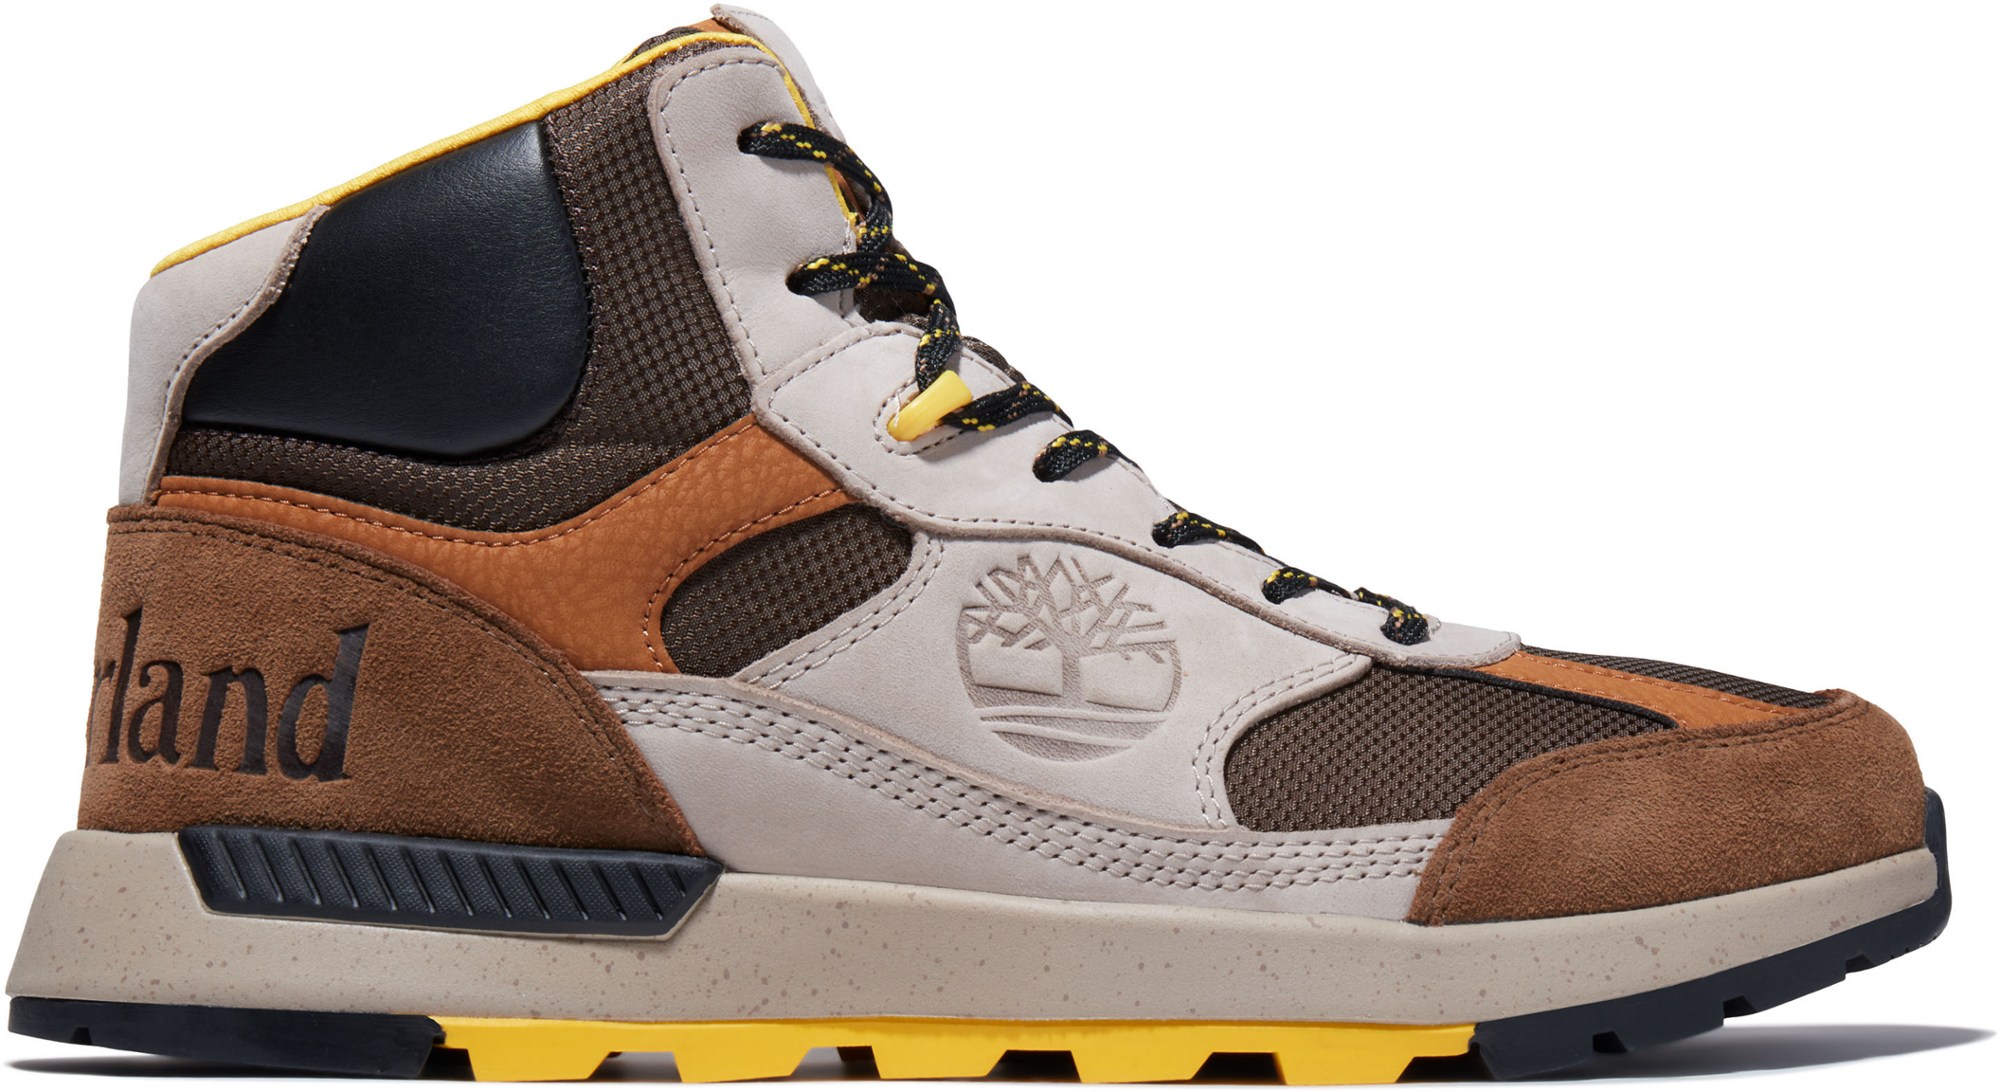 betreden Wreedheid Brawl This Timberland Hiking Boot Deal Cuts 18% Off the Price - The Manual